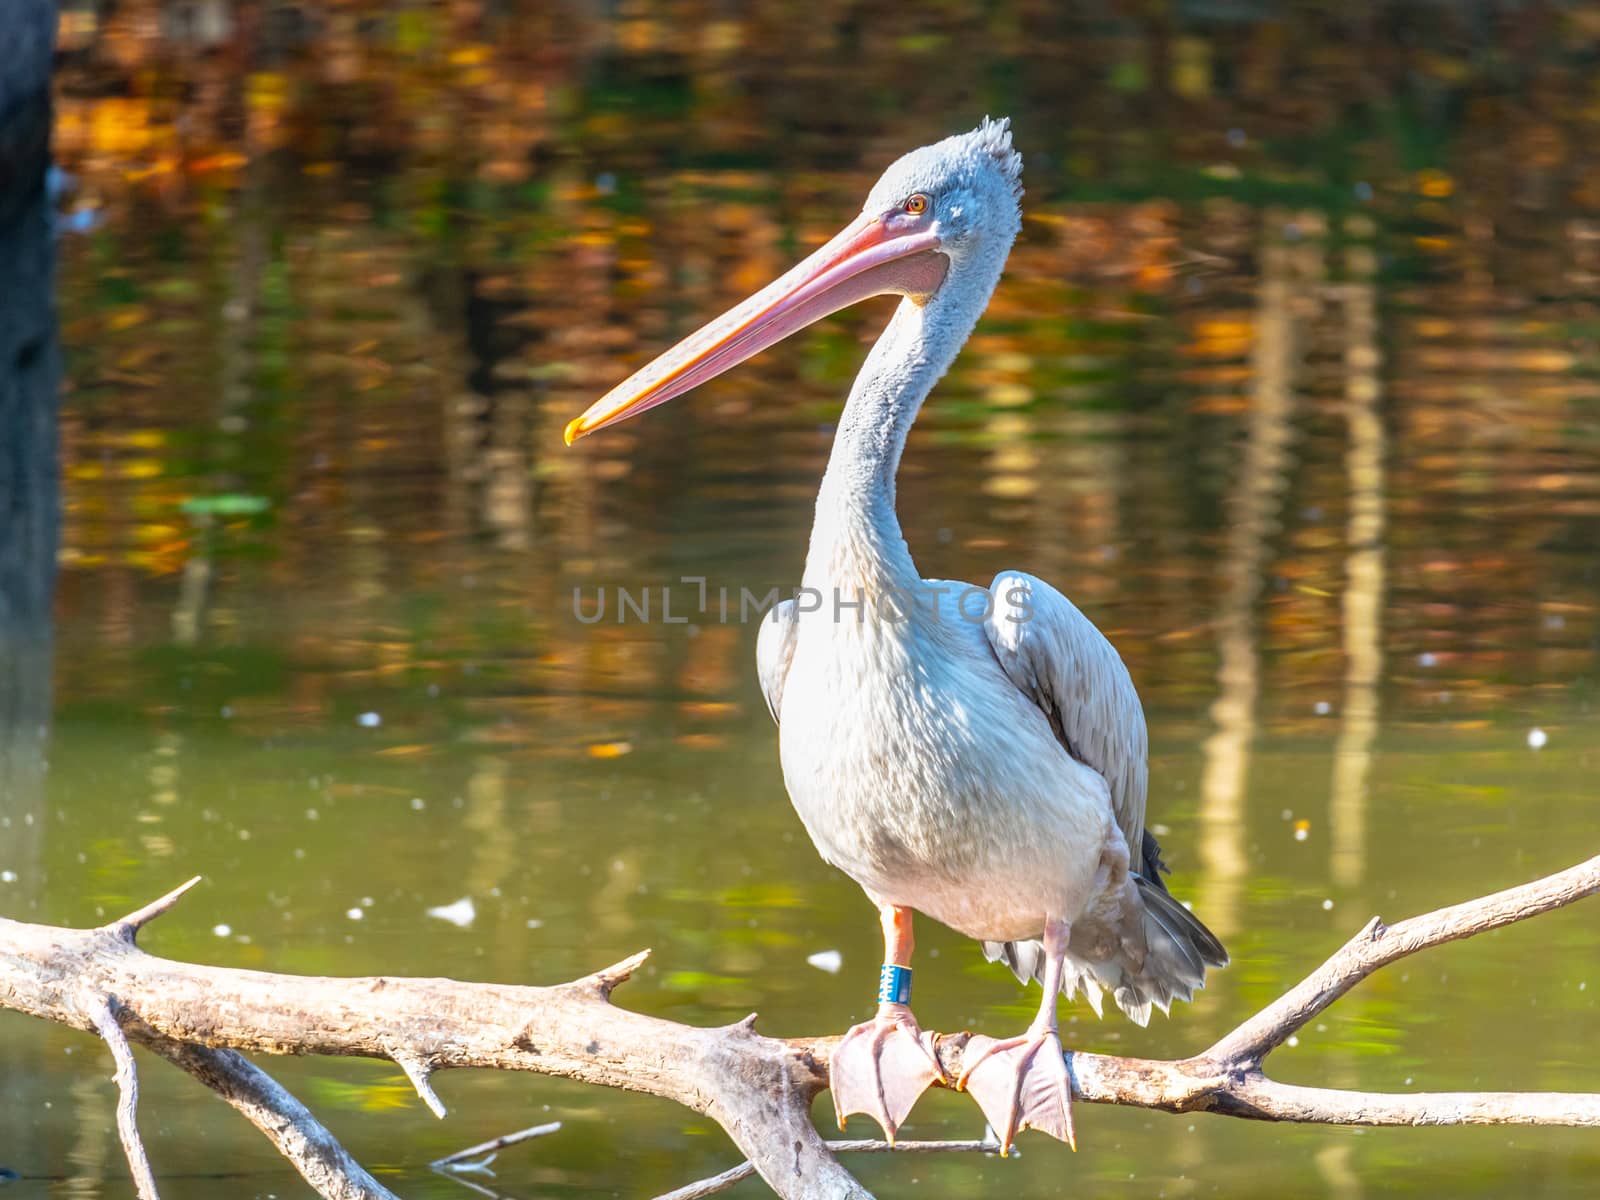 Pelican sitting on a branch above water.